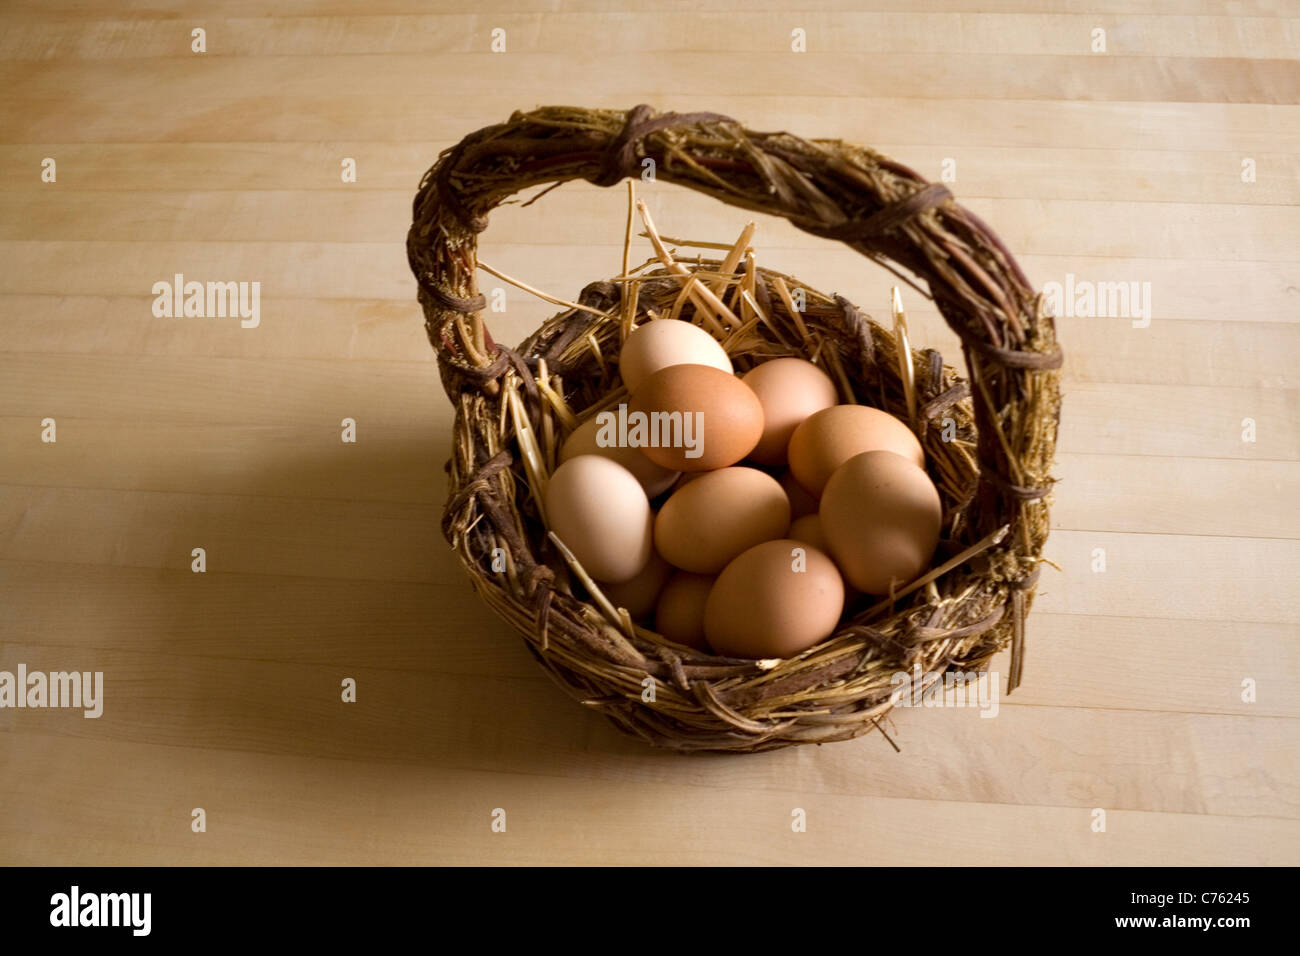 A basket of free range eggs on a bed of straw Stock Photo